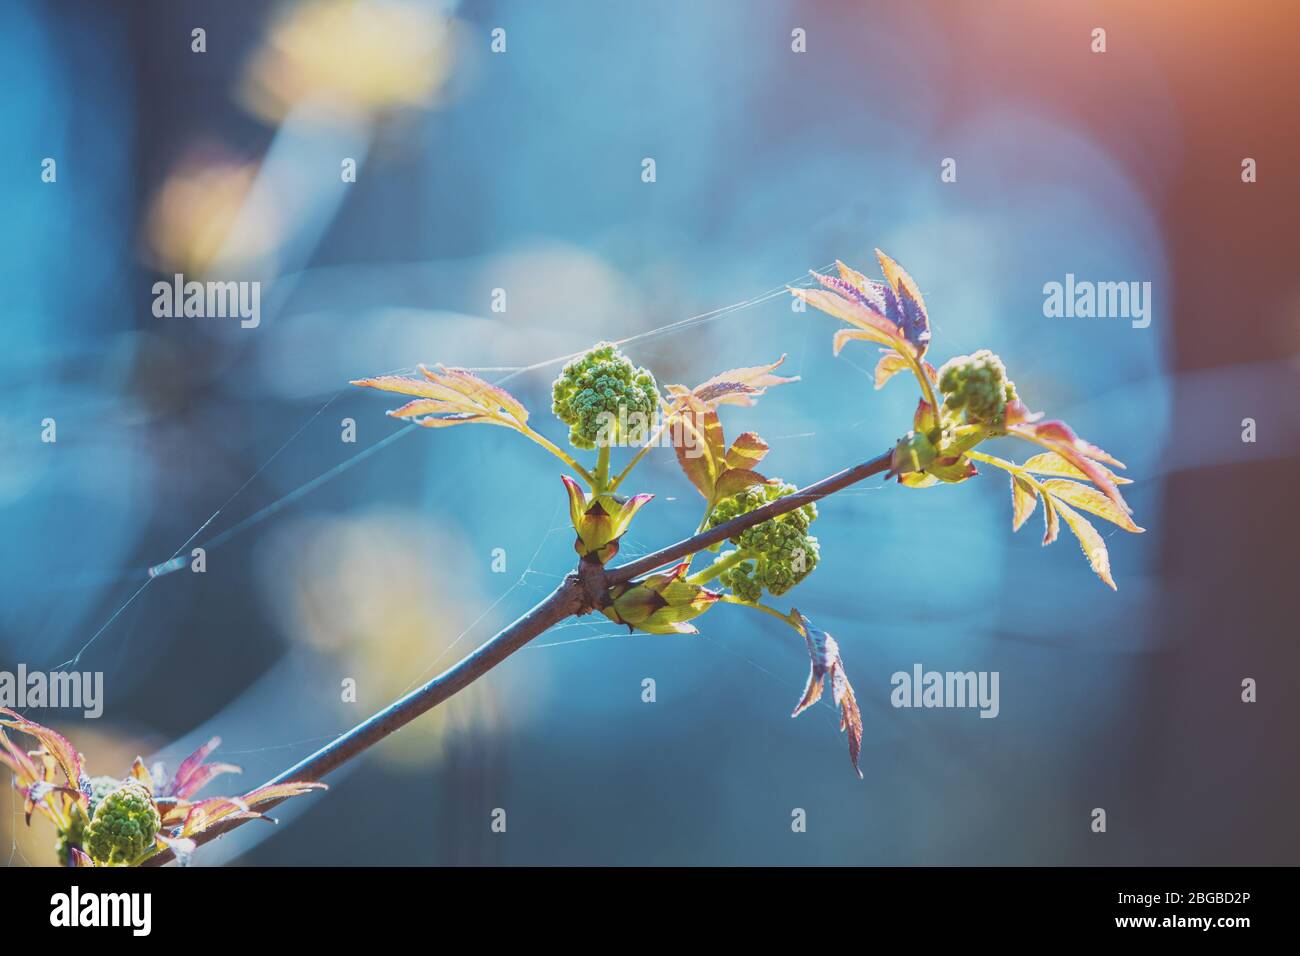 Branch of a young flowering elderberry (Sambucus) in early spring. Elderberry shrub nature background Stock Photo